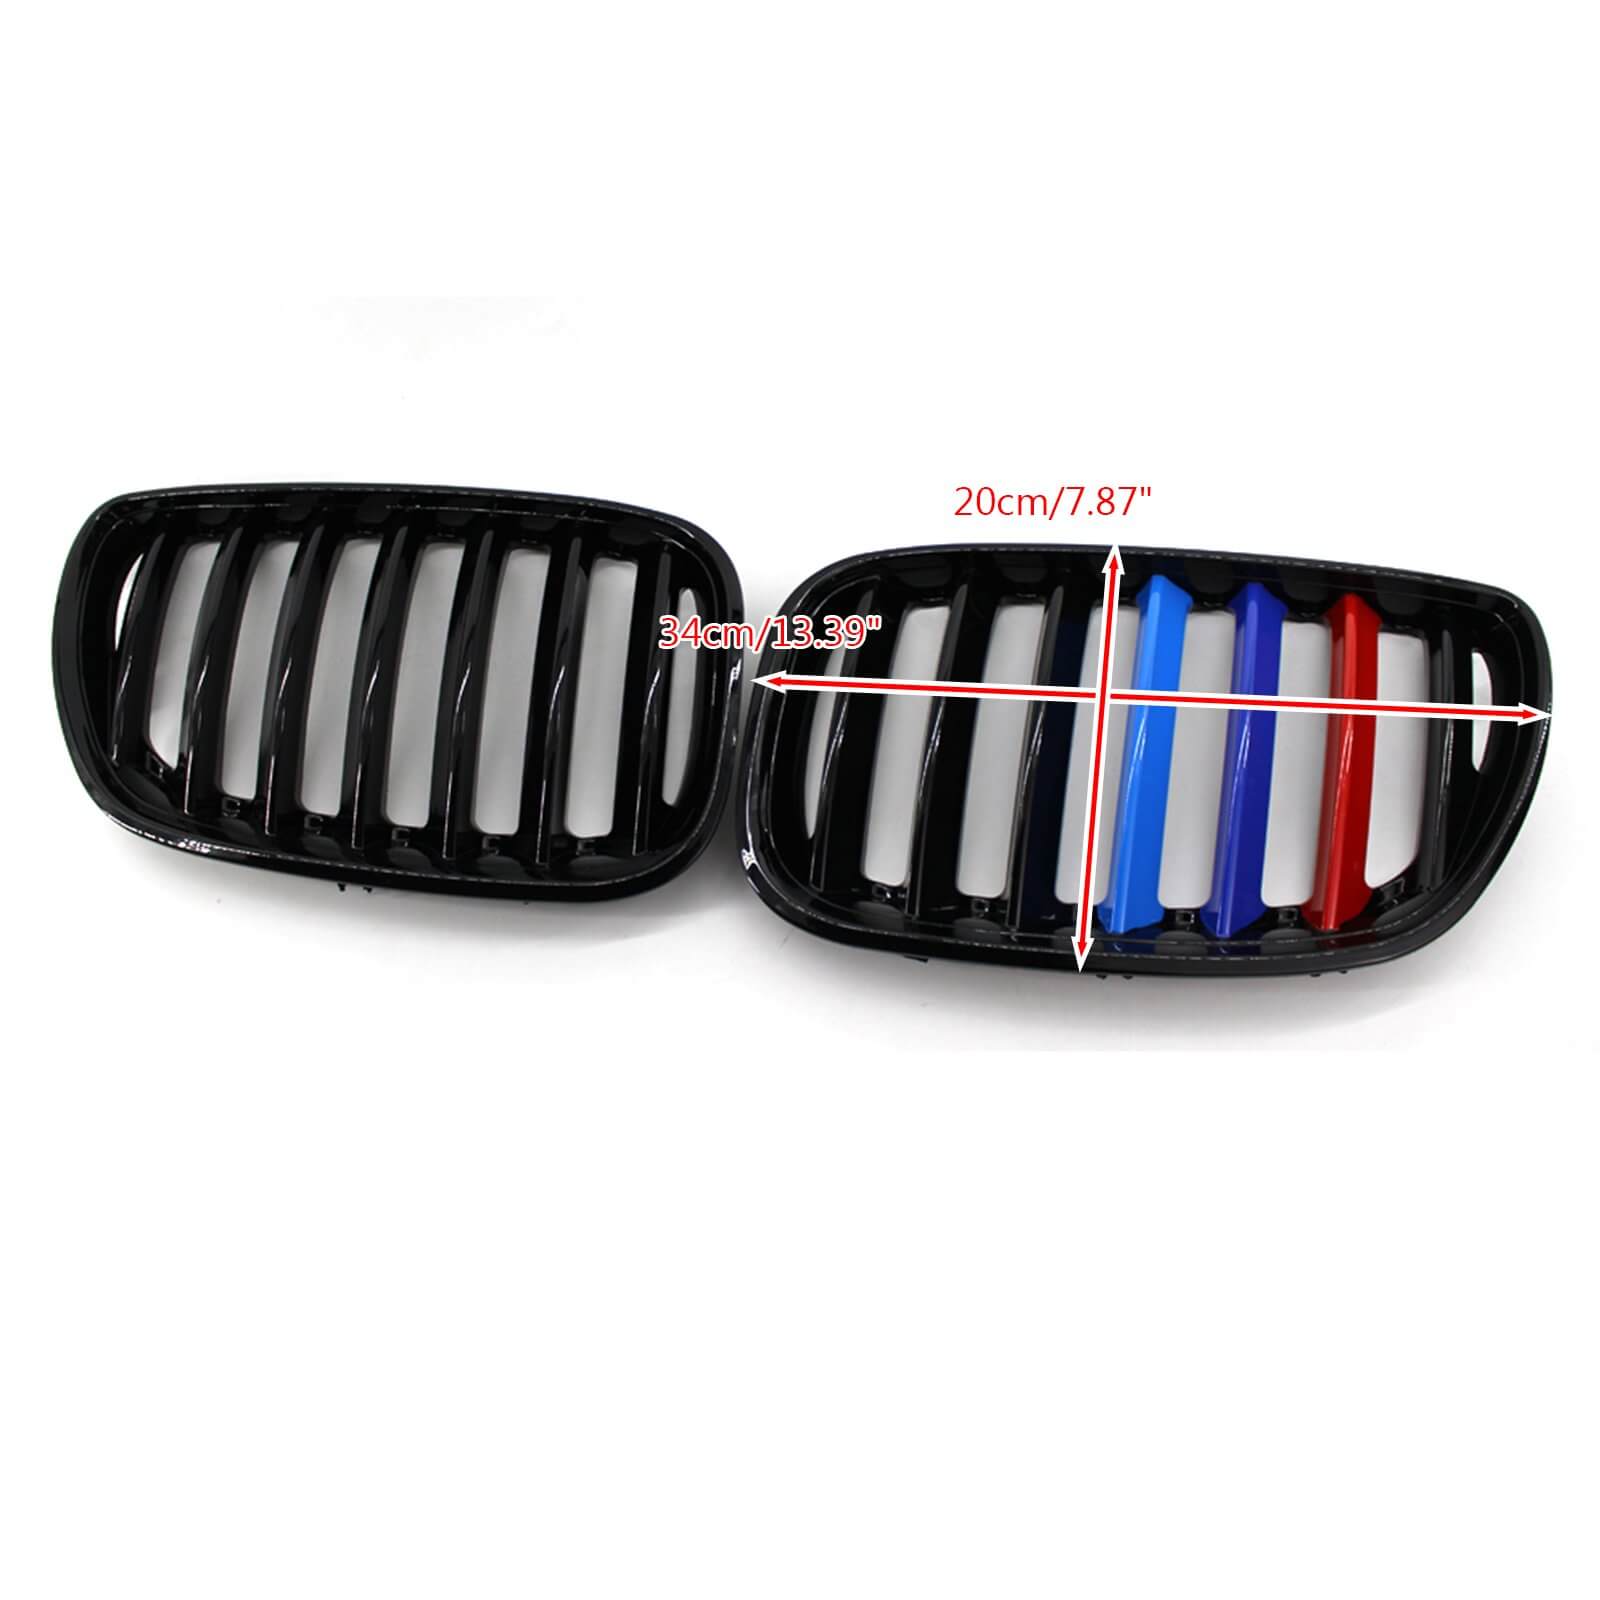 Gloss Black M-color Front Kidney Grill Grille Fit 2004-2006 BMW X5 E53 X Series Generic